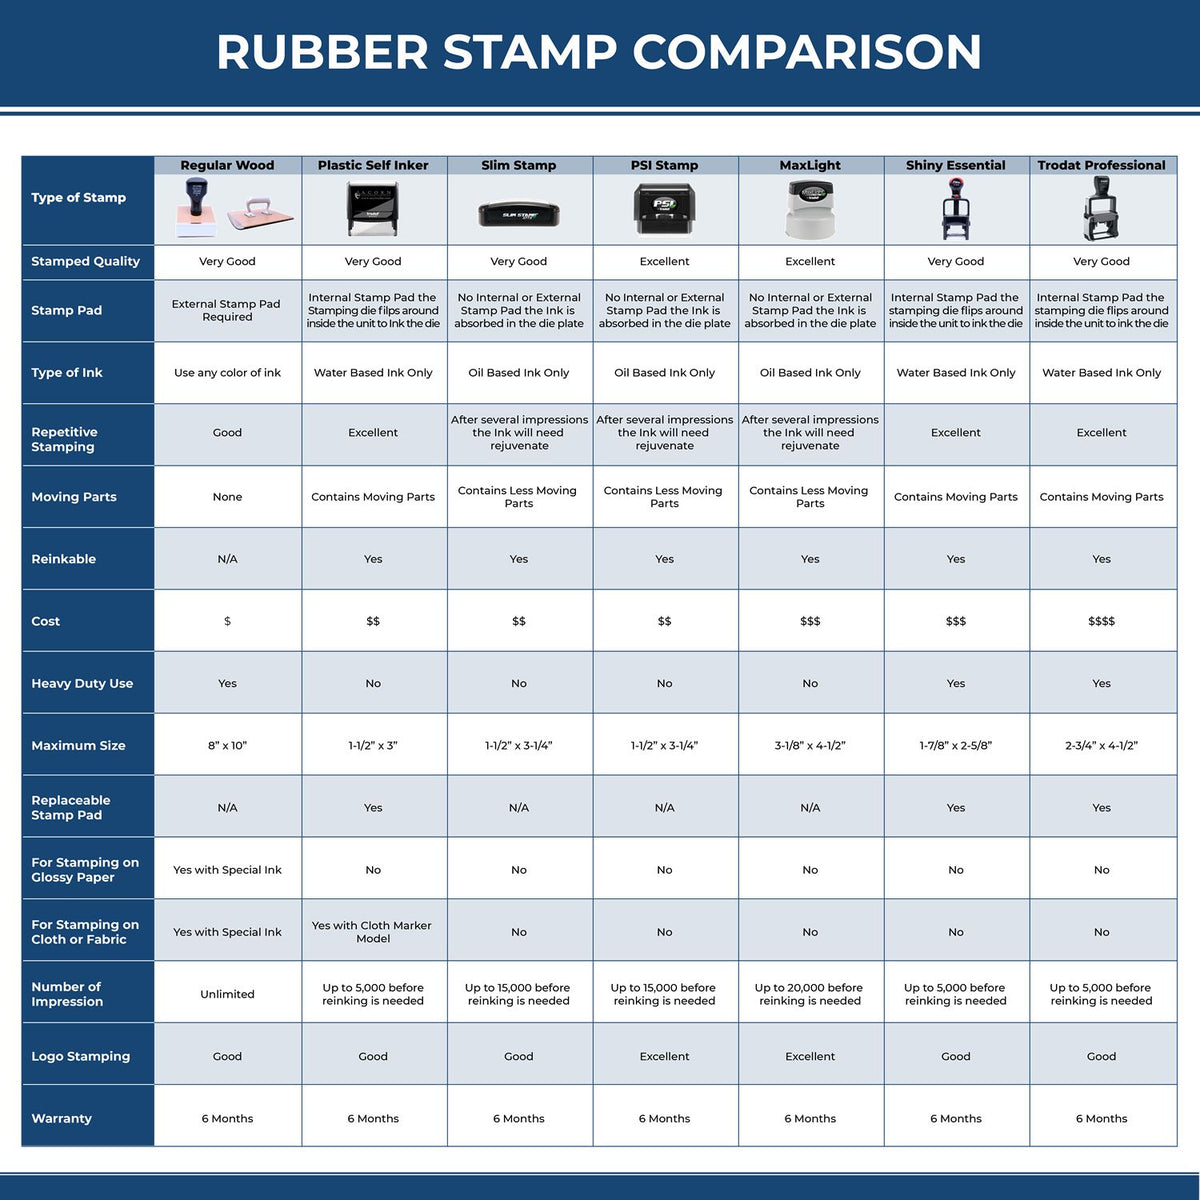 A comparison chart for the different types of mount models available for the Self-Inking Tennessee PE Stamp.